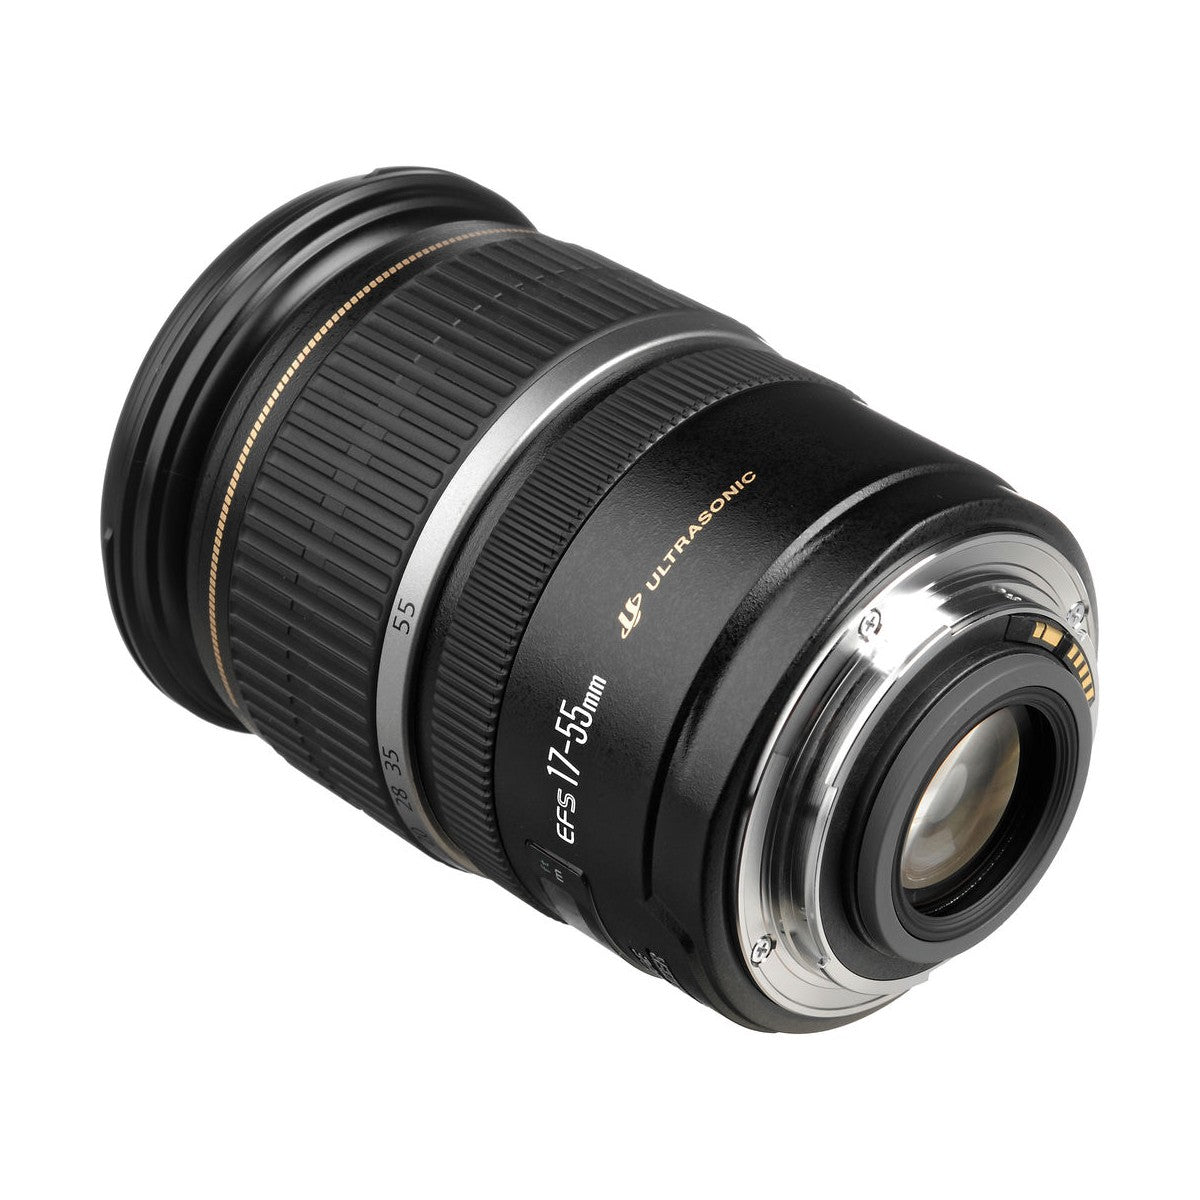 Canon EF-S 17-55mm f2.8 IS USM Lens - Product Photo 2 - Side view, with emphasis on the glass components